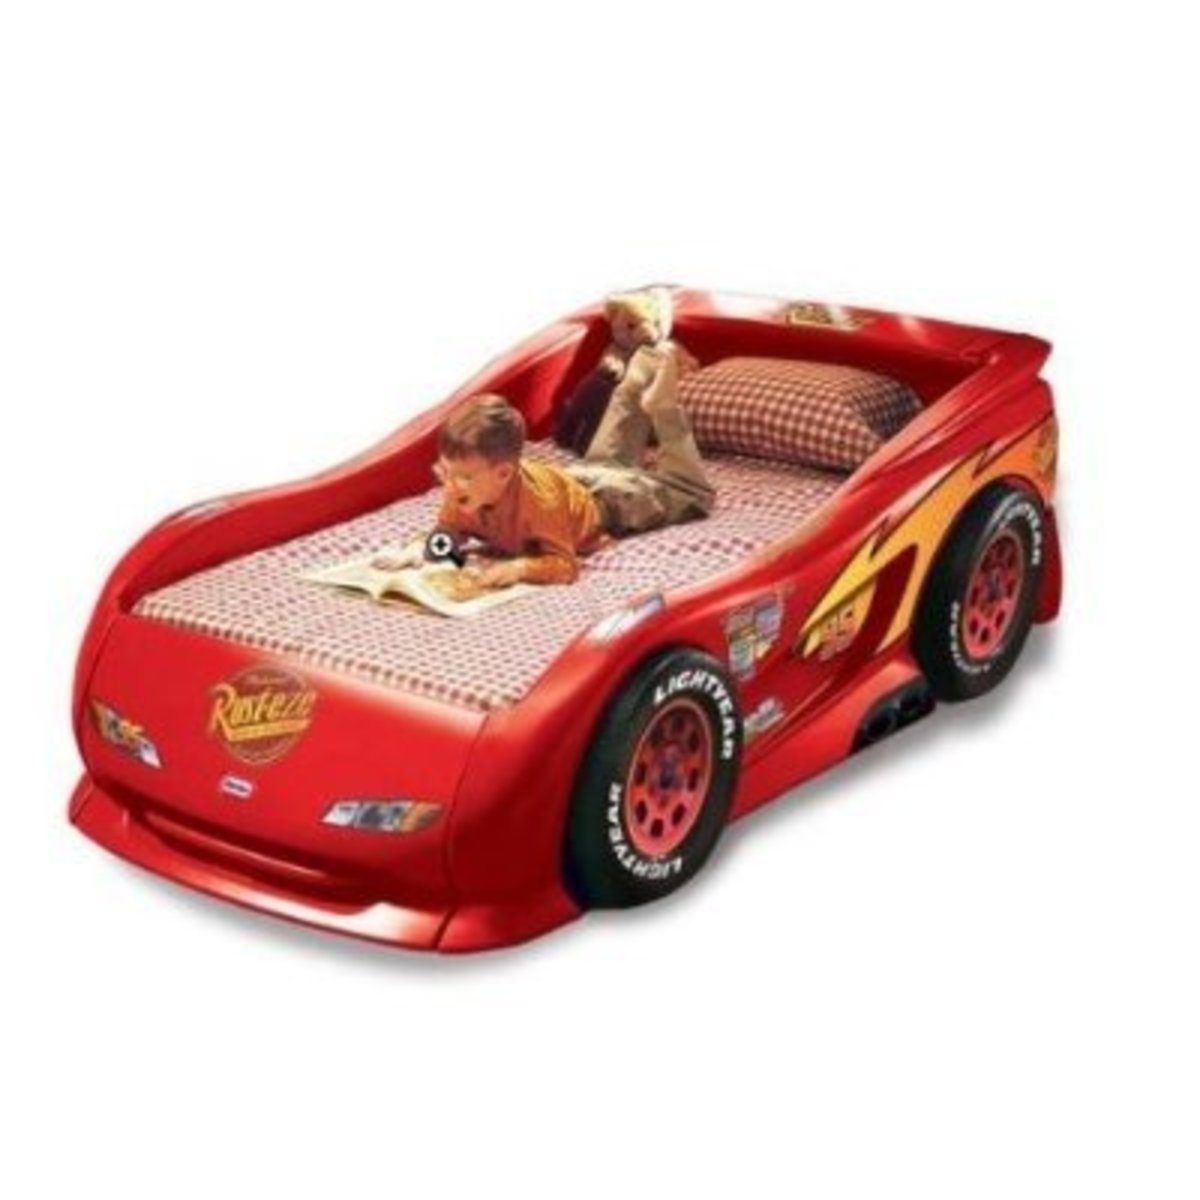 Little Tikes Race Car Bed A Er S, Lightning Mcqueen Toddler To Twin Bed